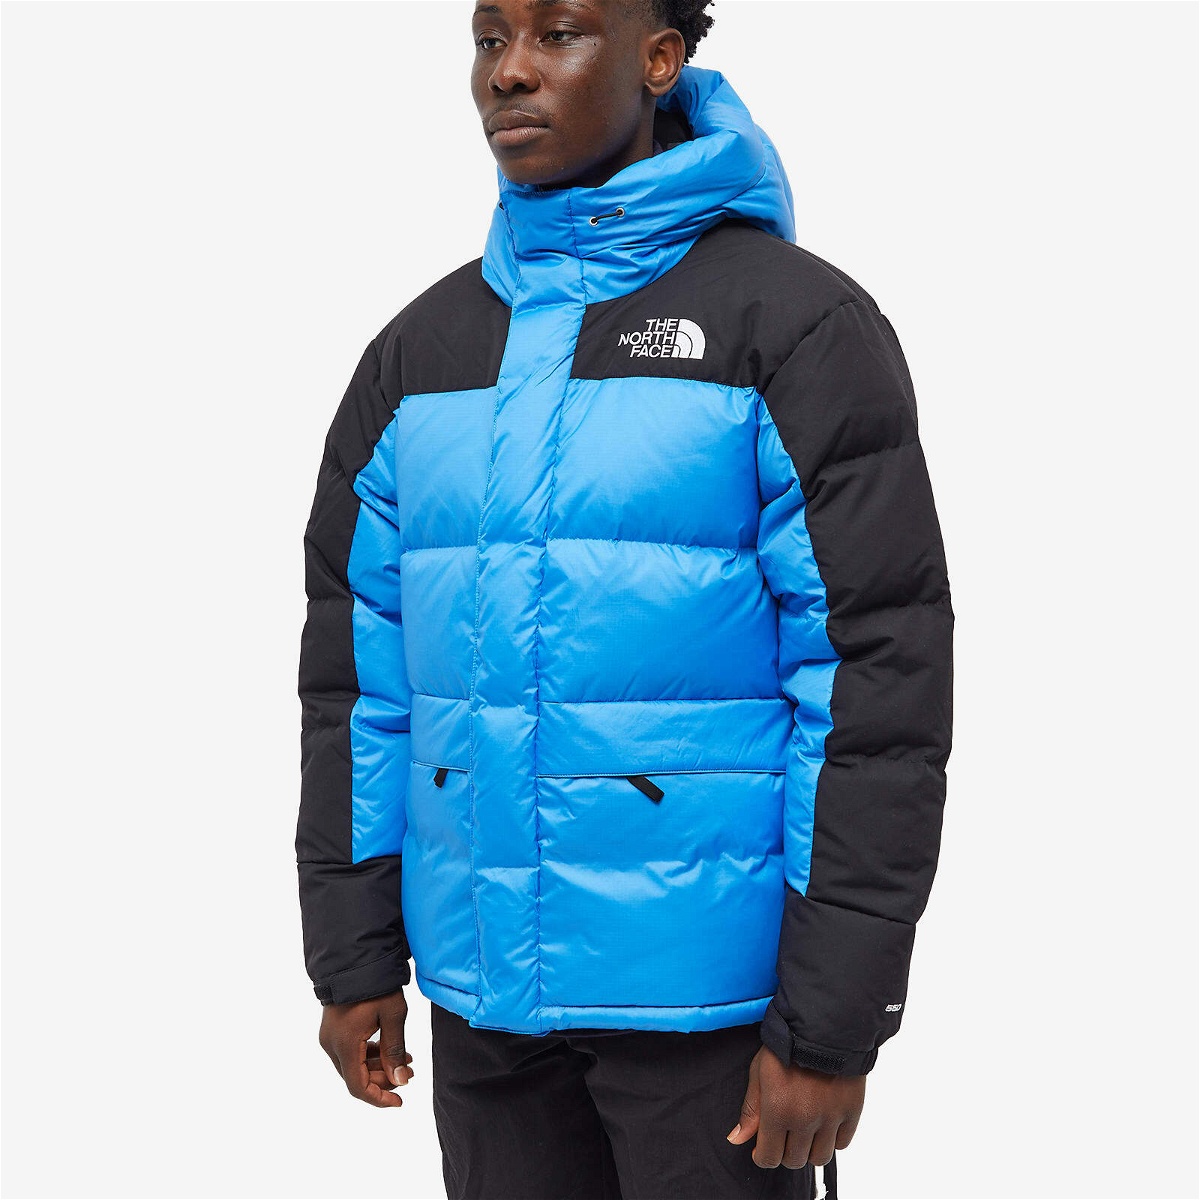 himalayan insulated jacket men black in nylon - THE NORTH FACE - d — 2